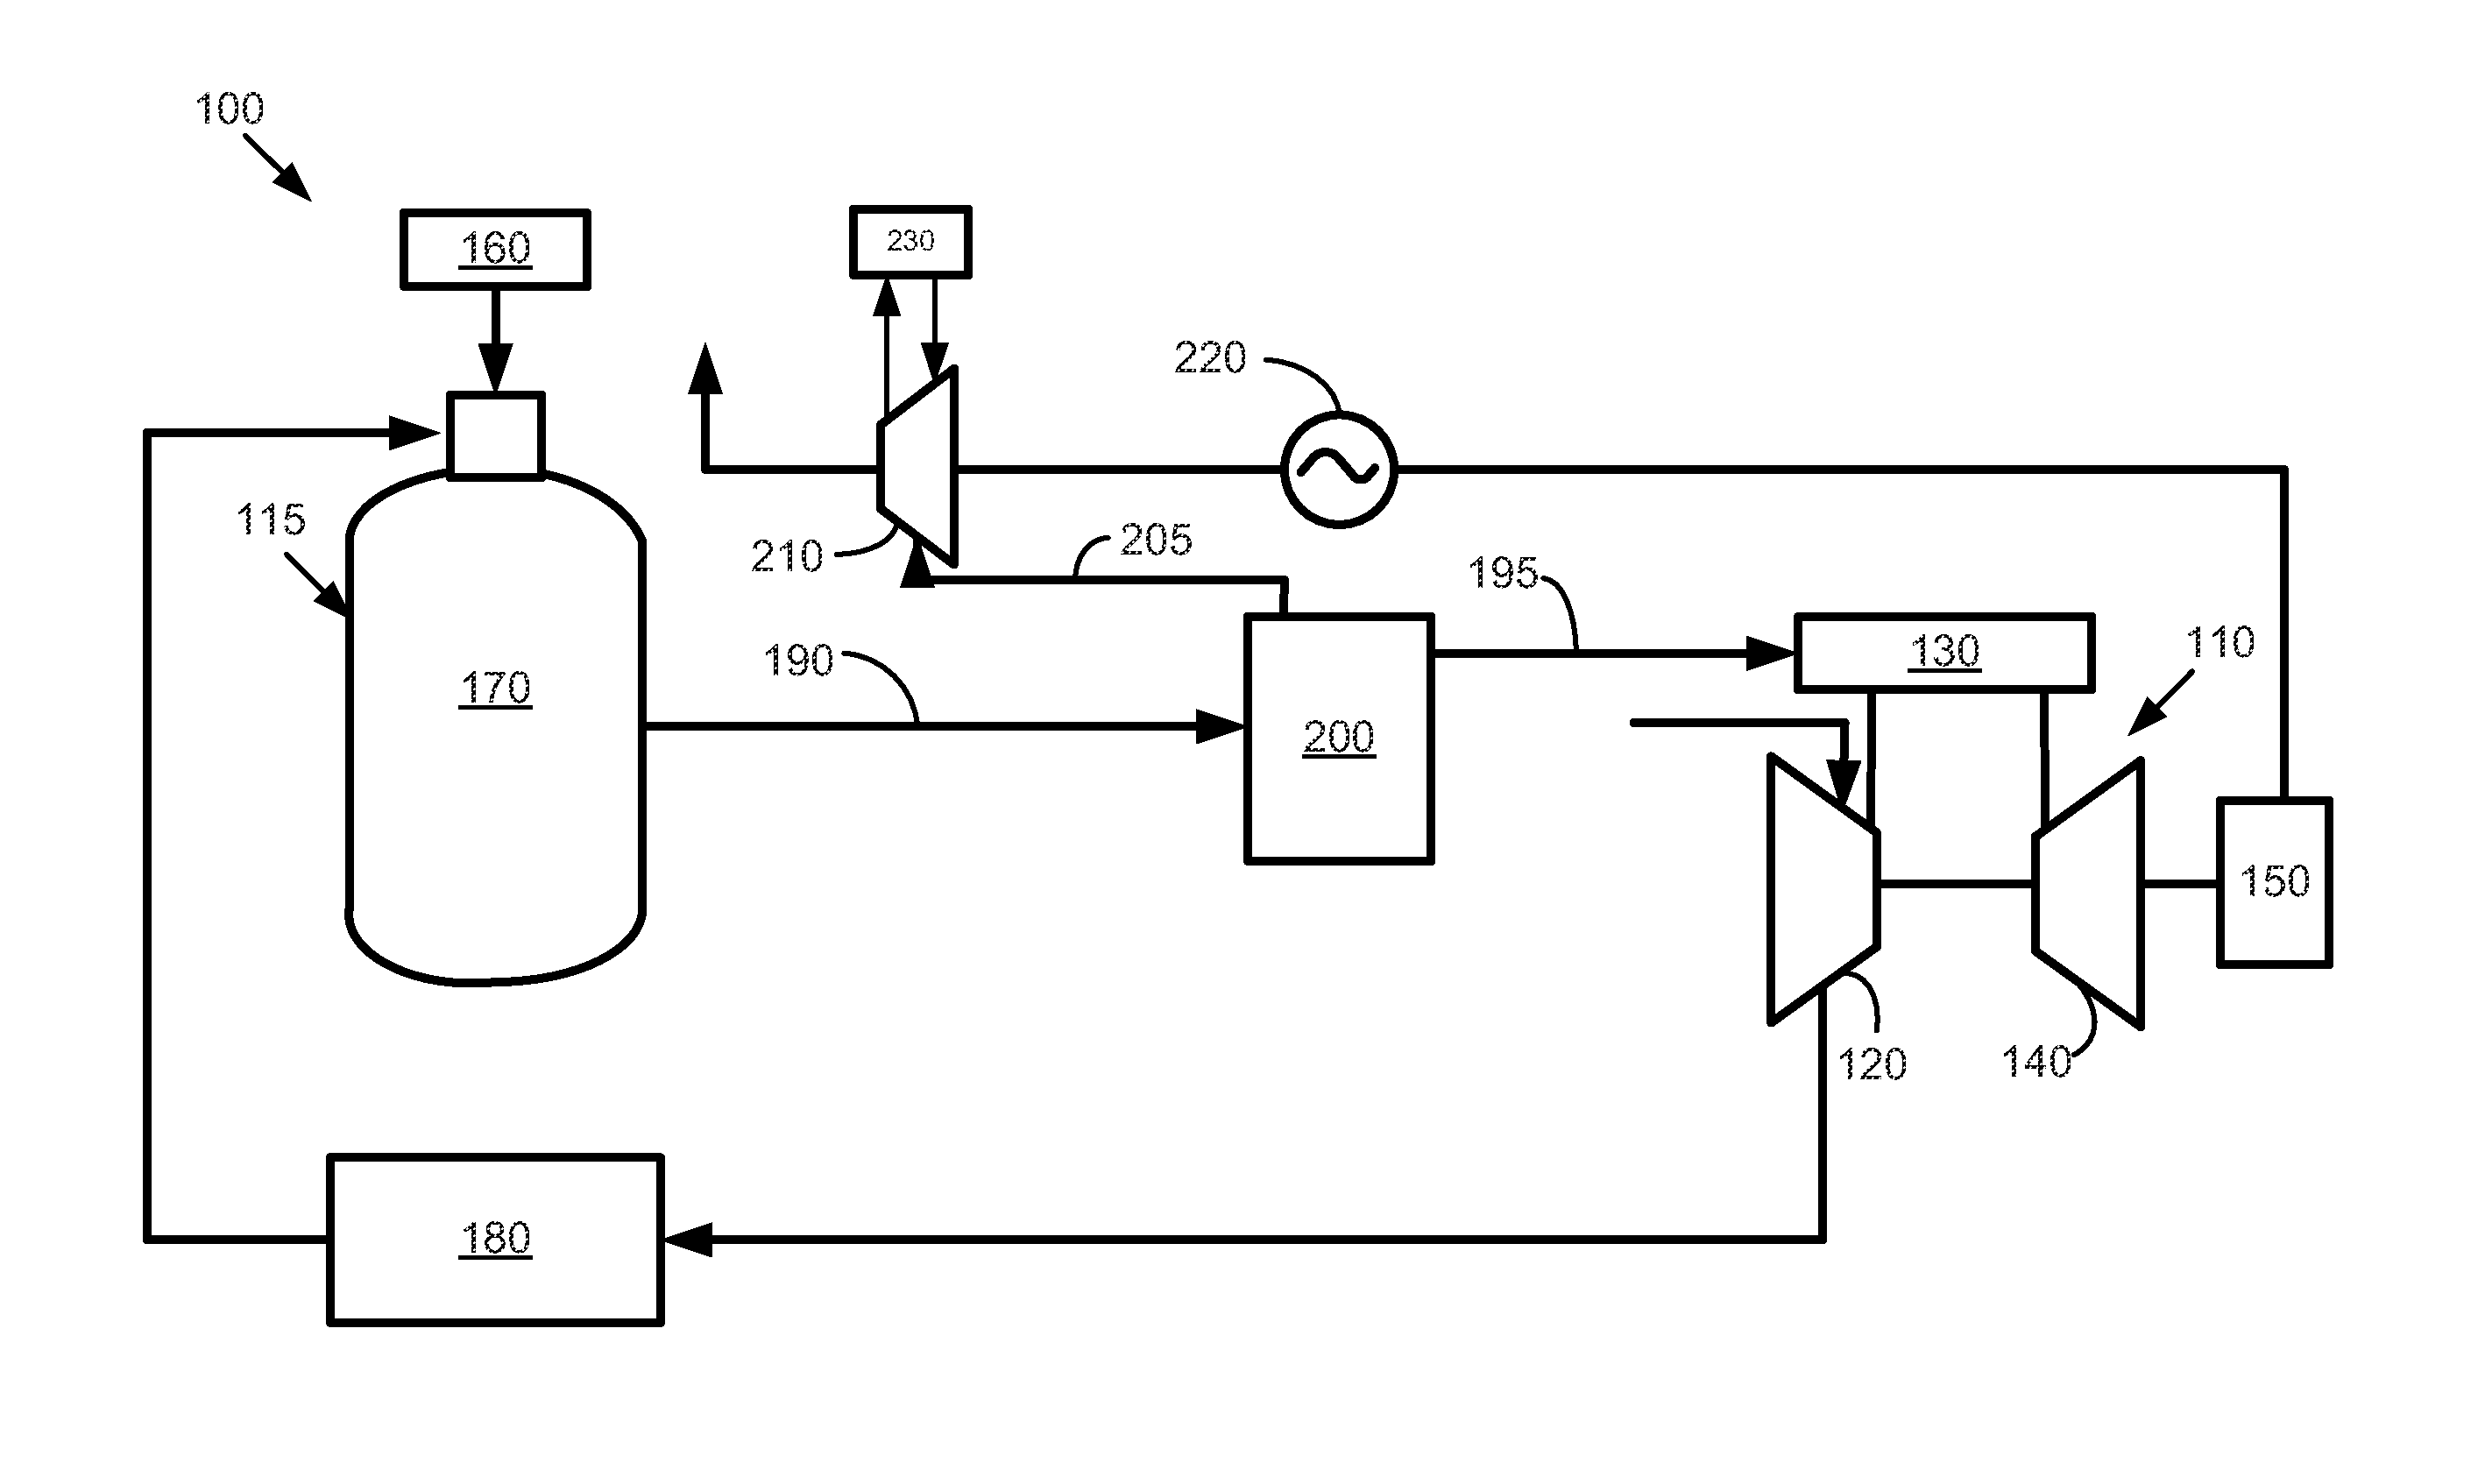 Integrated gasification combined cycle system with vapor absorption chilling